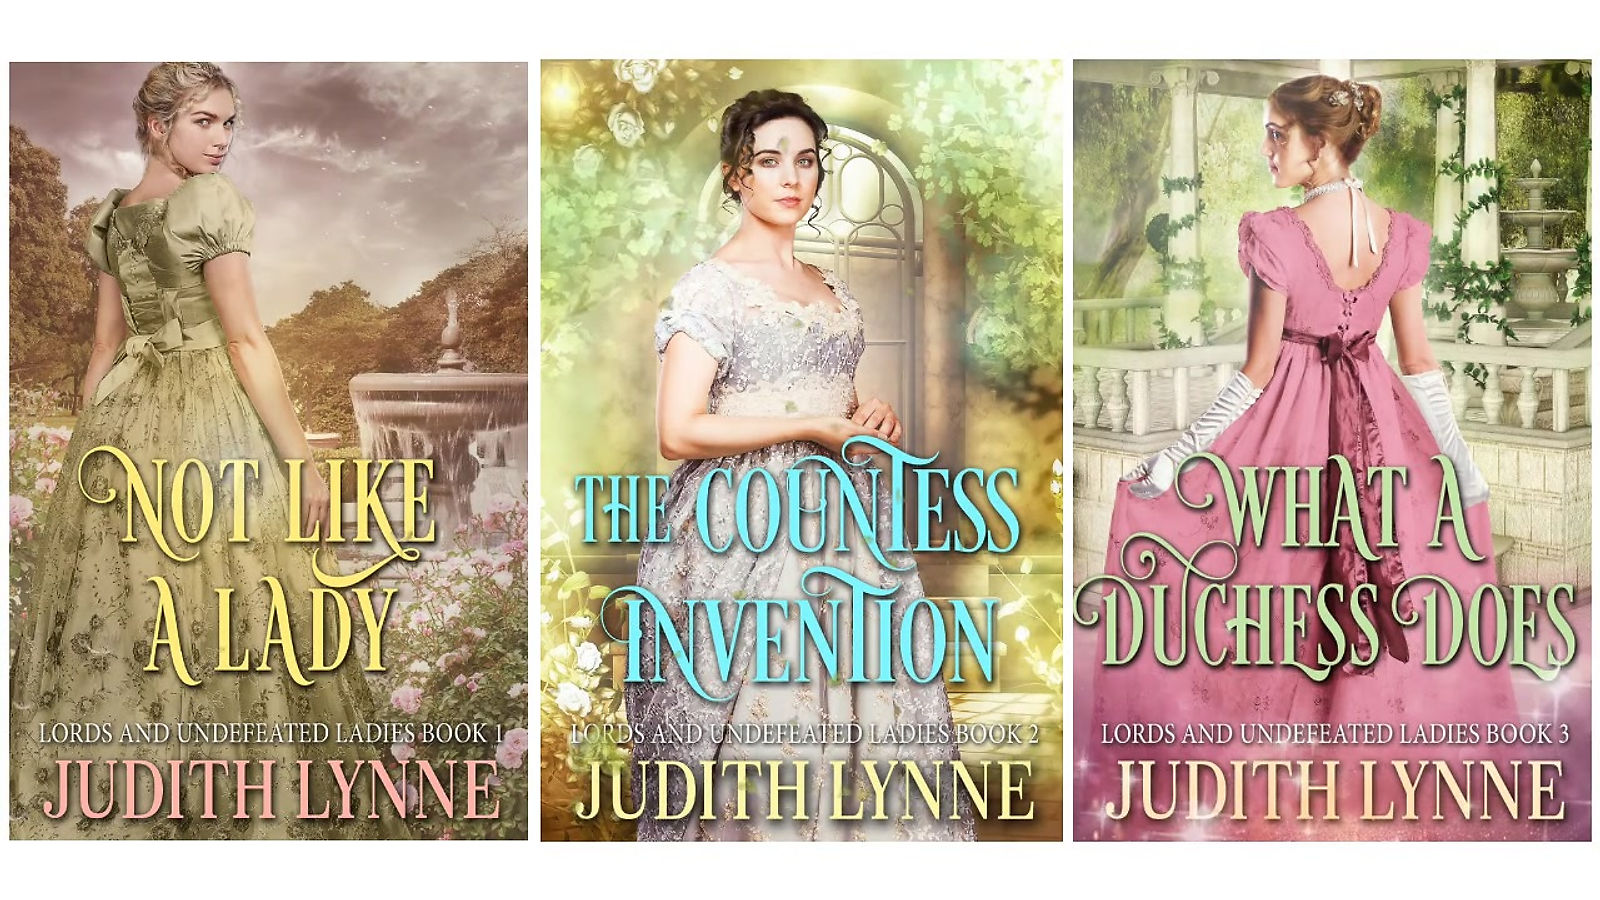 Lords & Undefeated Ladies Series by Judith Lynne